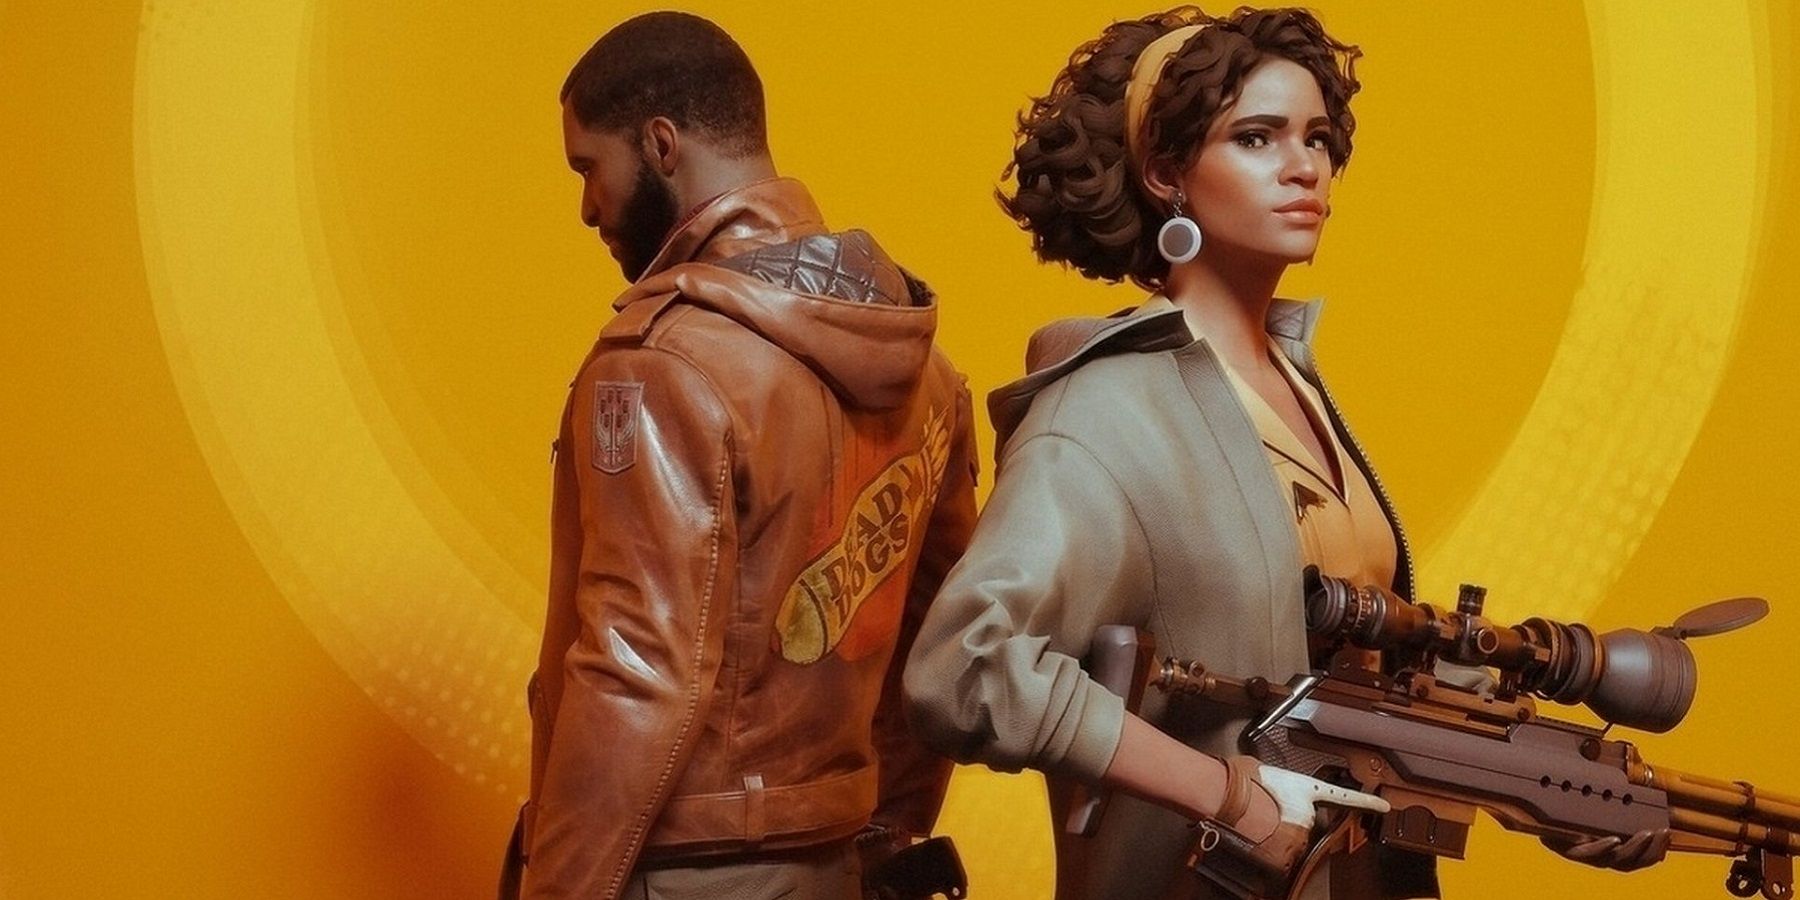 Artwork from Deathloop showing Julianna and Colt back-to-back on a yellow gradiant background.